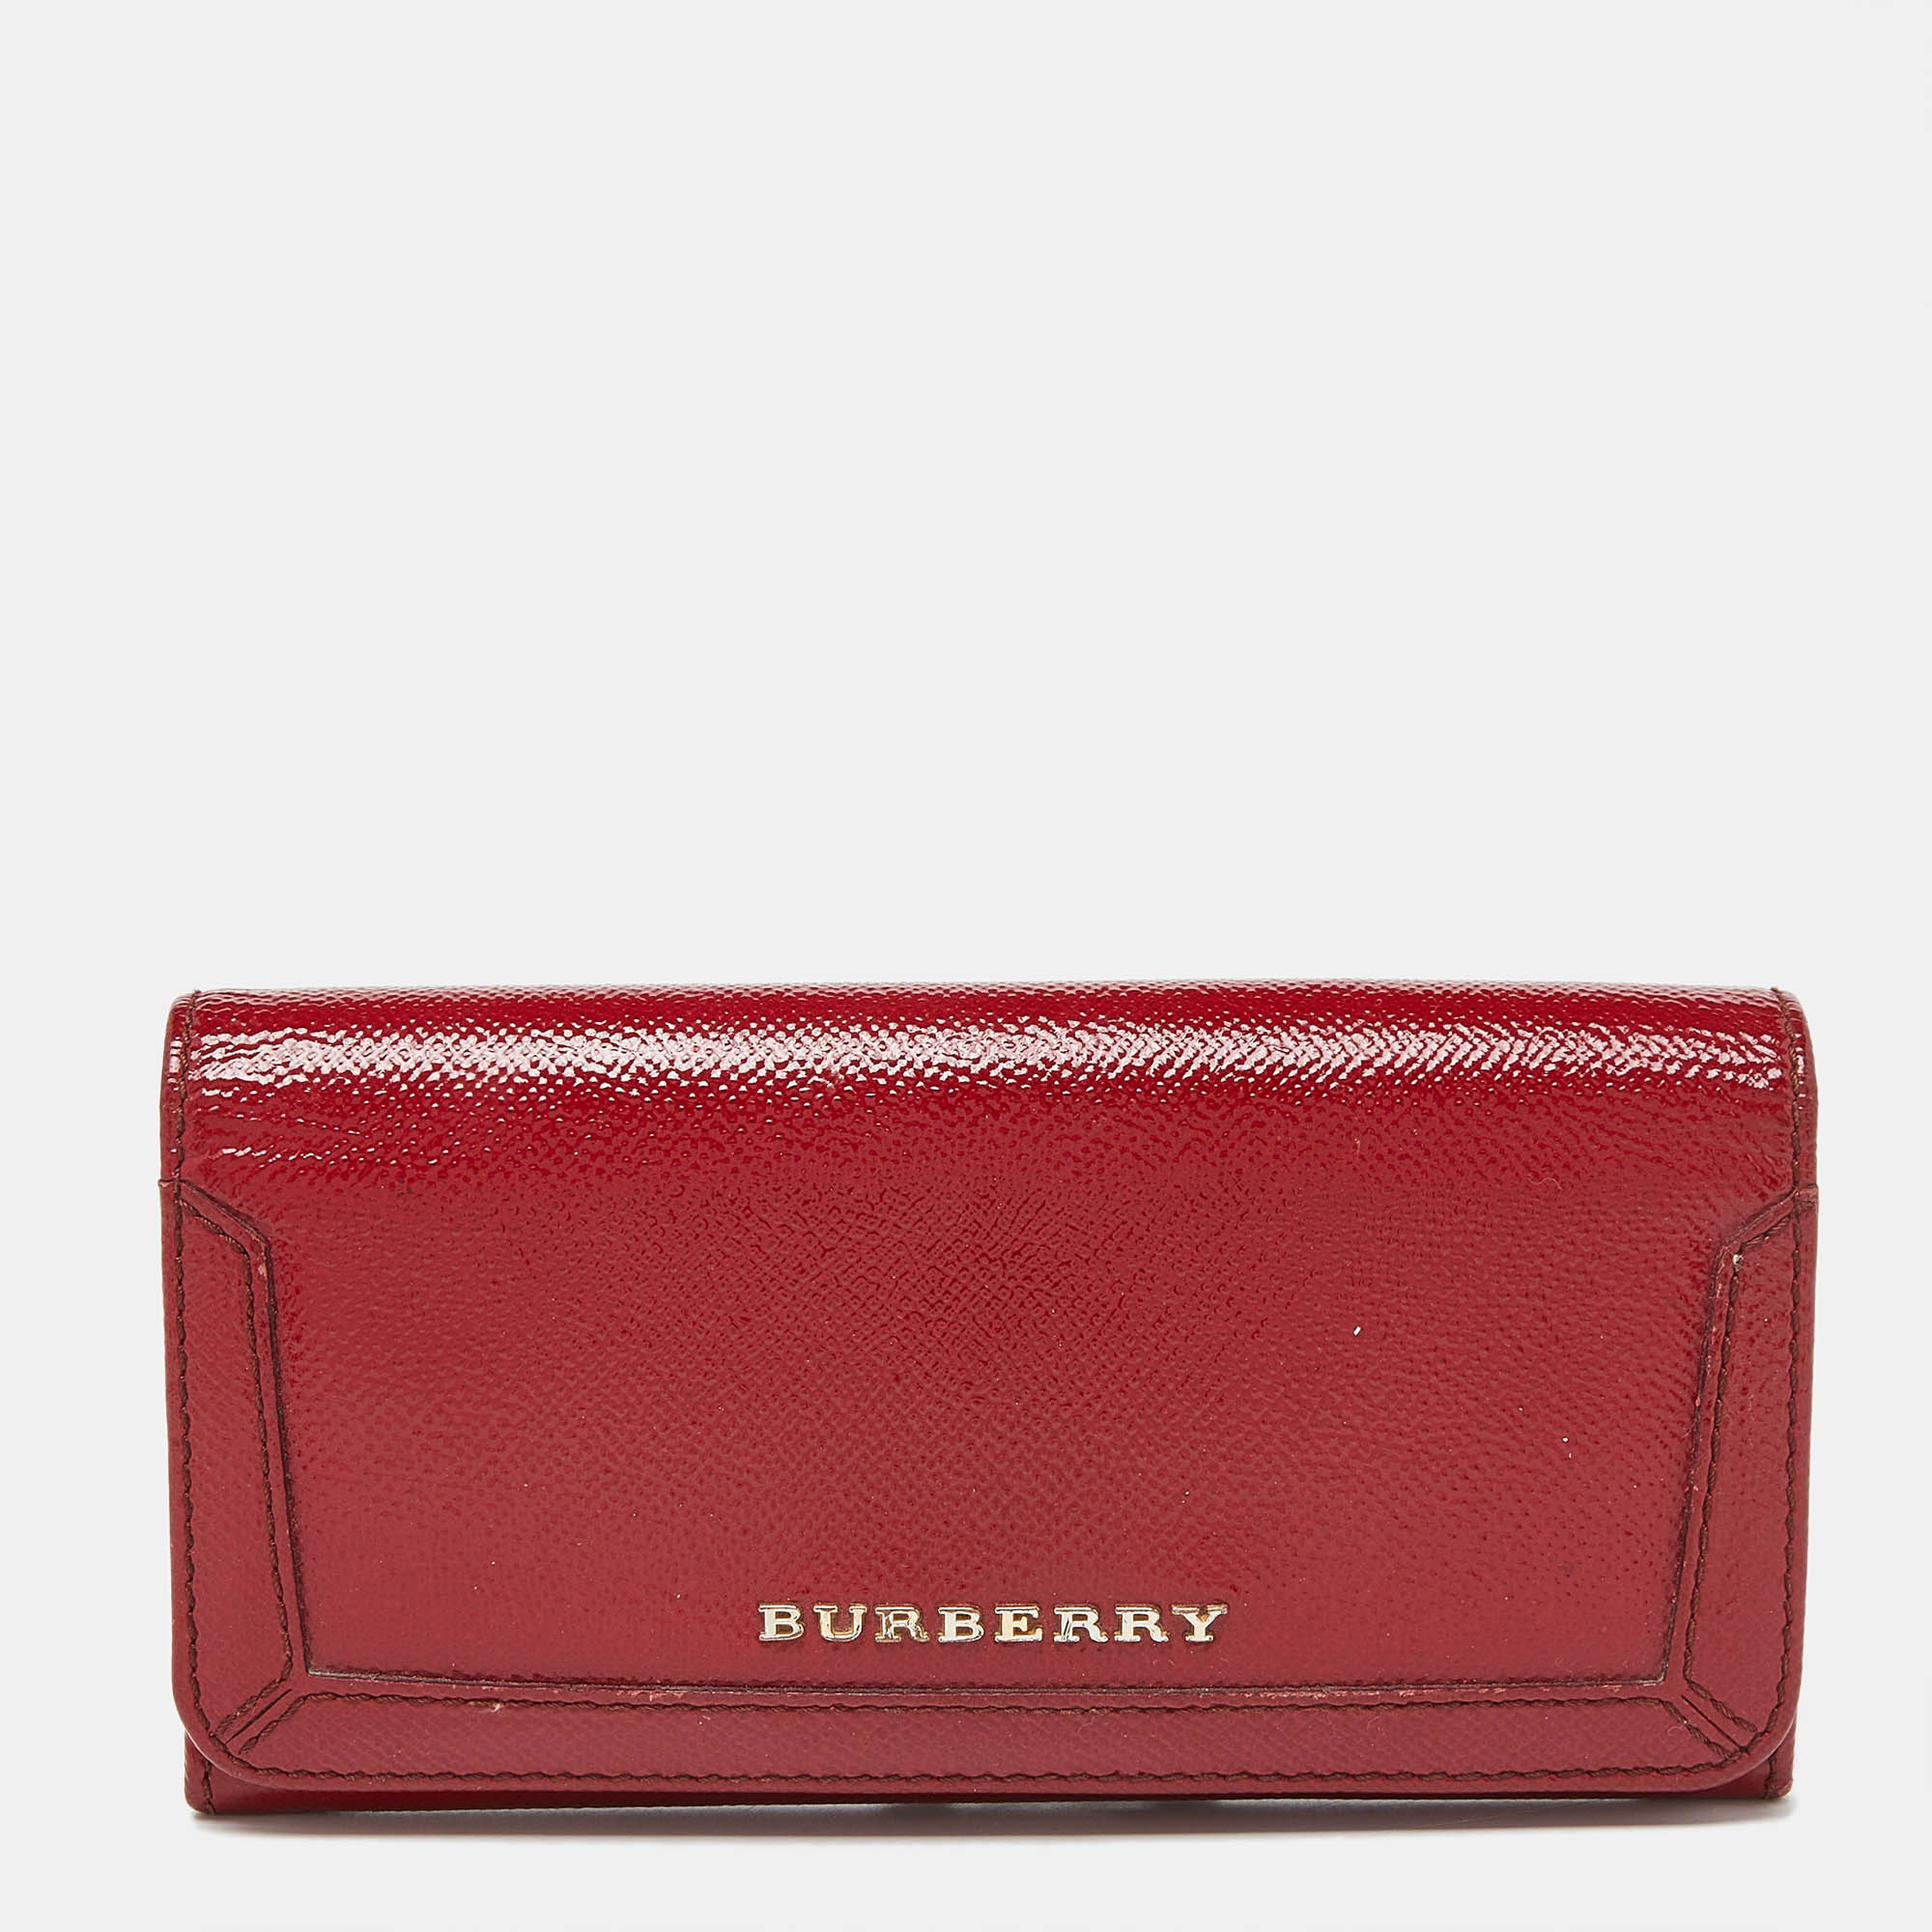 Pre-owned Burberry Red Patent Leather Flap Continental Wallet